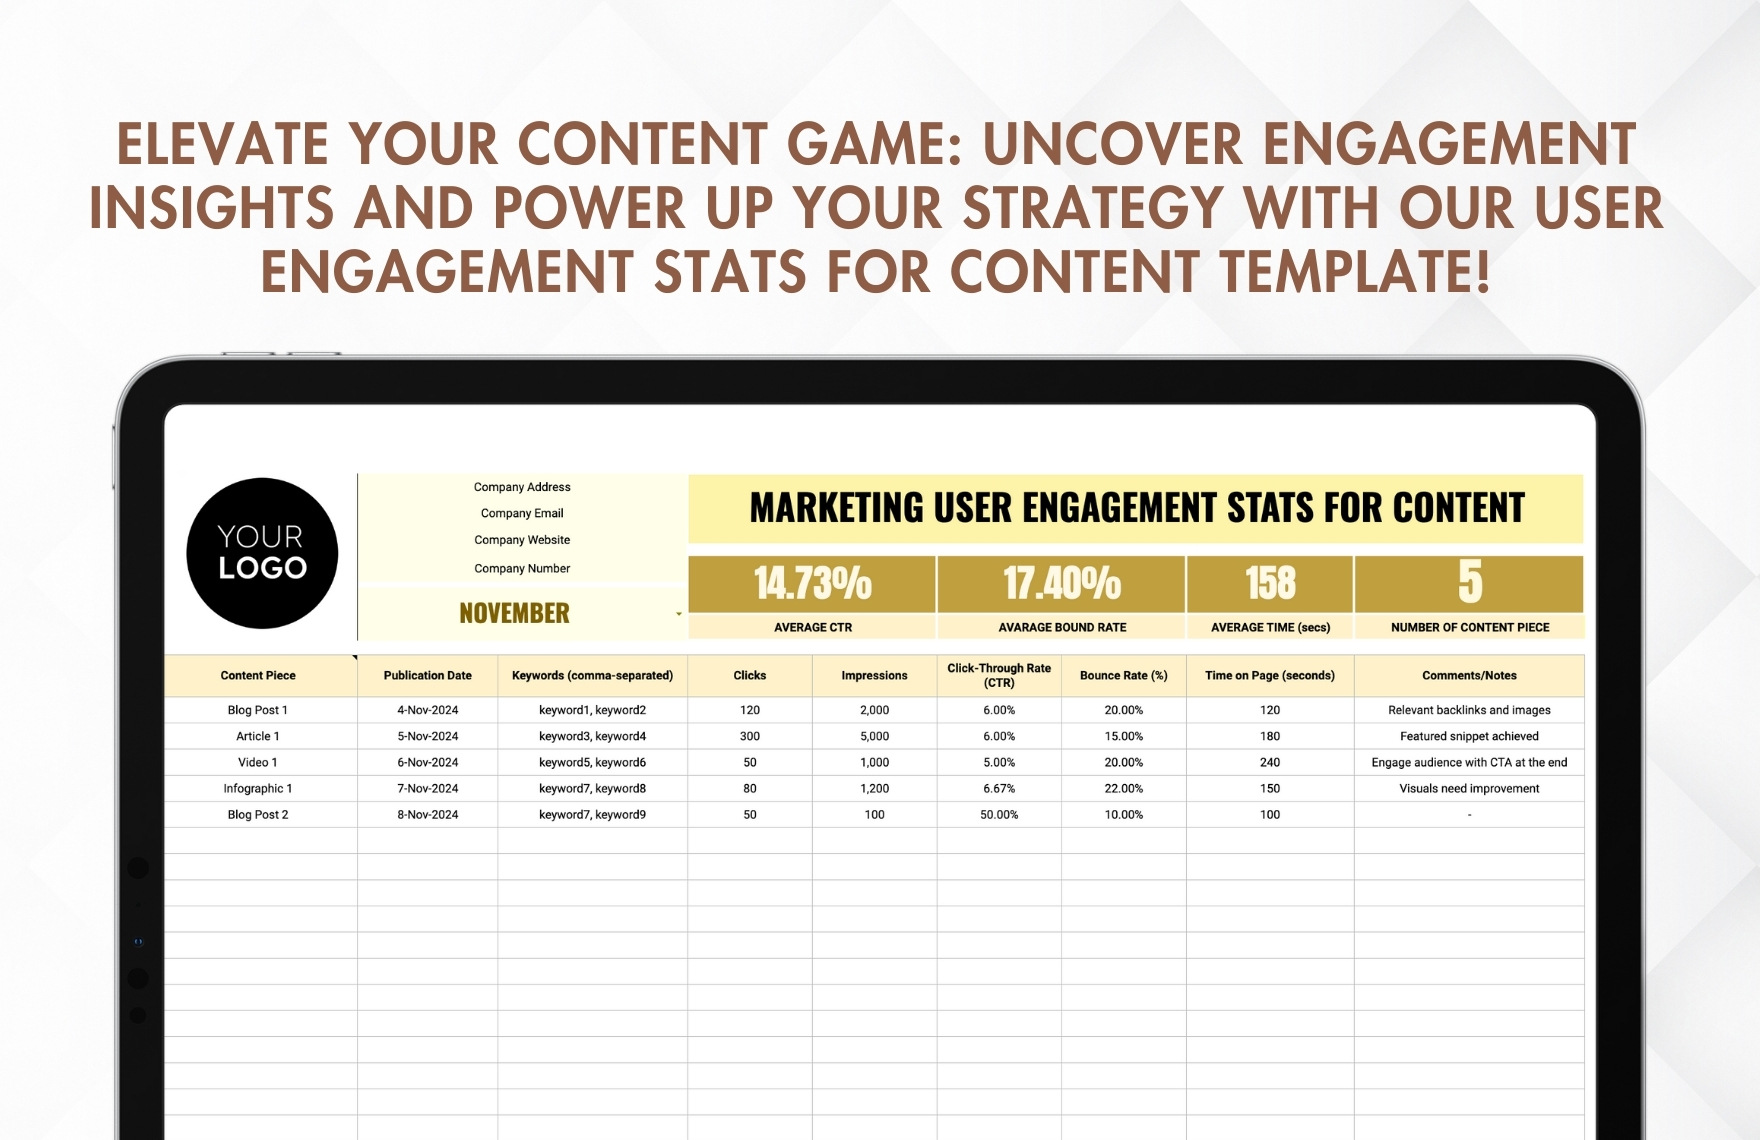 Marketing User Engagement Stats for Content Template